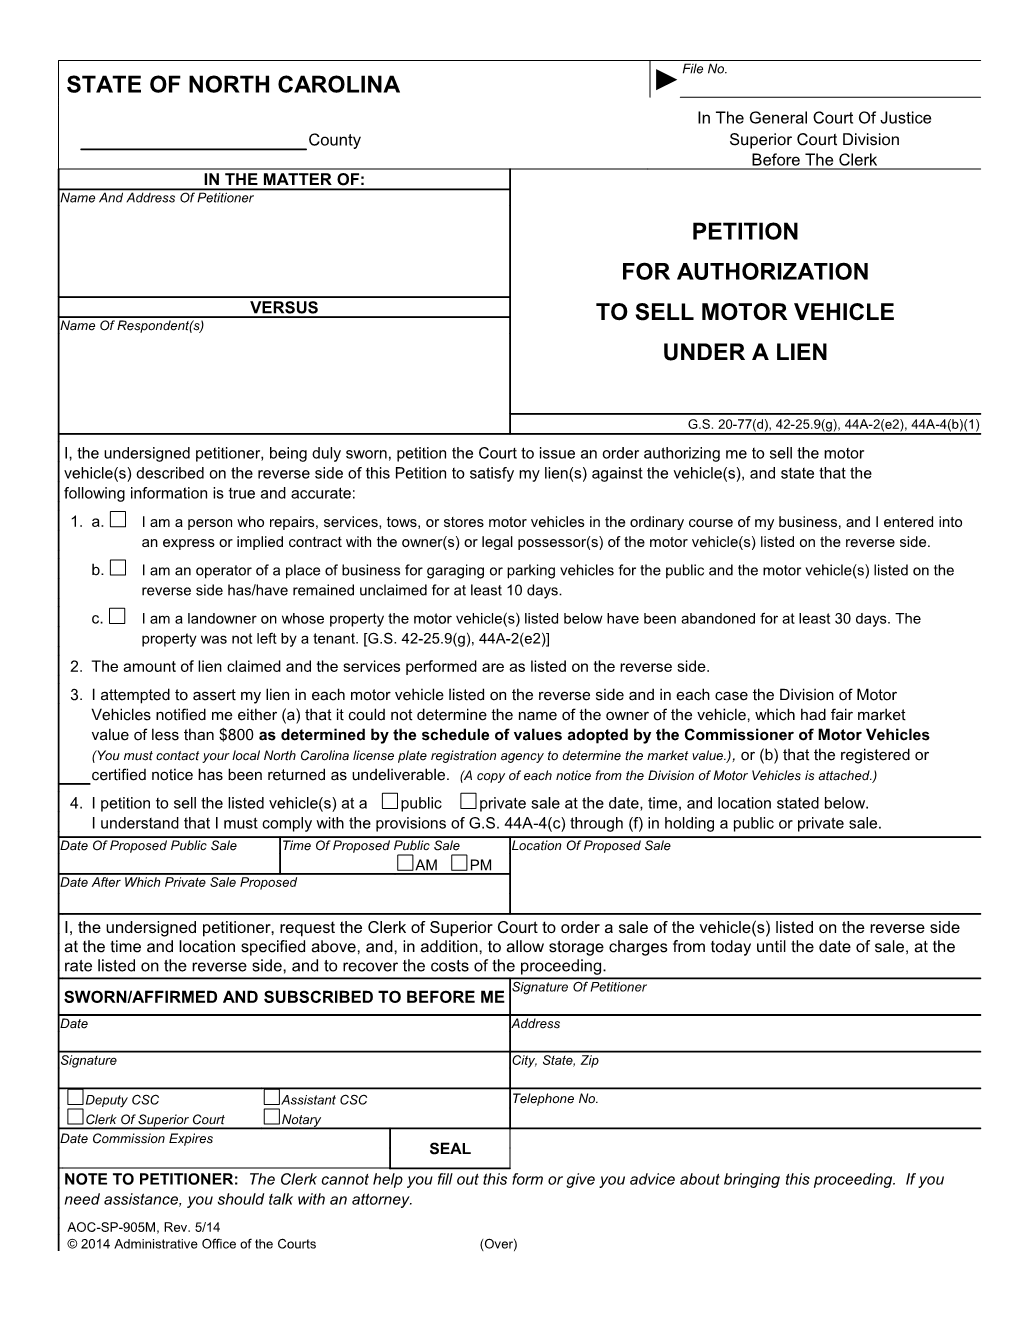 Petition for Authorization to Sell Motor Vehicle Under a Lien